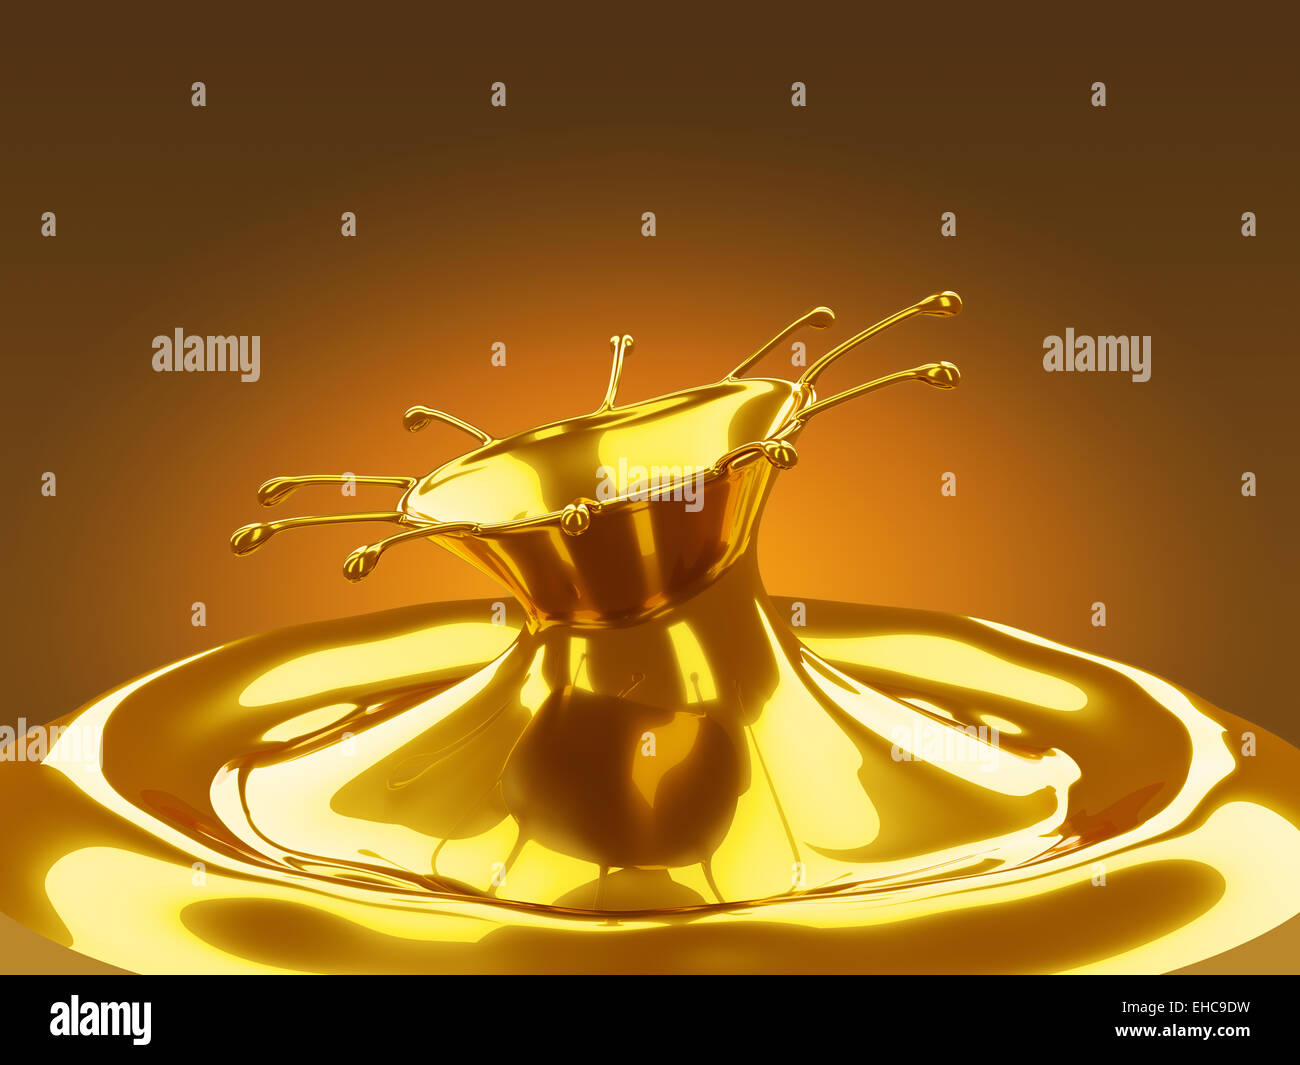 Splash of melted gold metal with waves. Large resolution Stock Photo